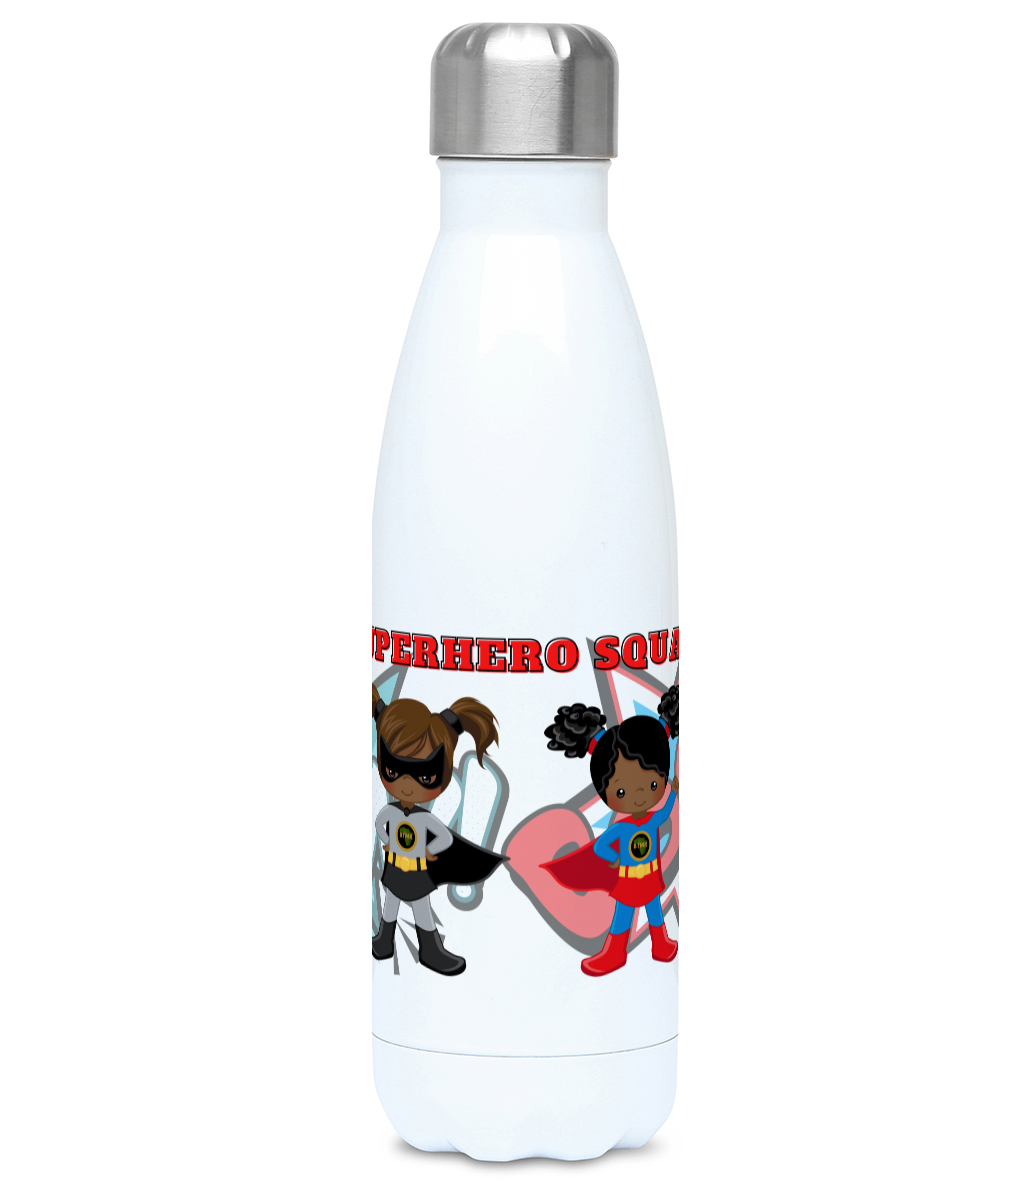 Right Profile of personalised Hydro Flask, featuring  4 characters from the BlackLikeMe SuperHero collection, 2 boy superheroes - in grey and two girl superheroines in blue and grey. Behind is an action background featuring the words Kapow and Boom. Hydro Flask is personalised at the top of the picture 